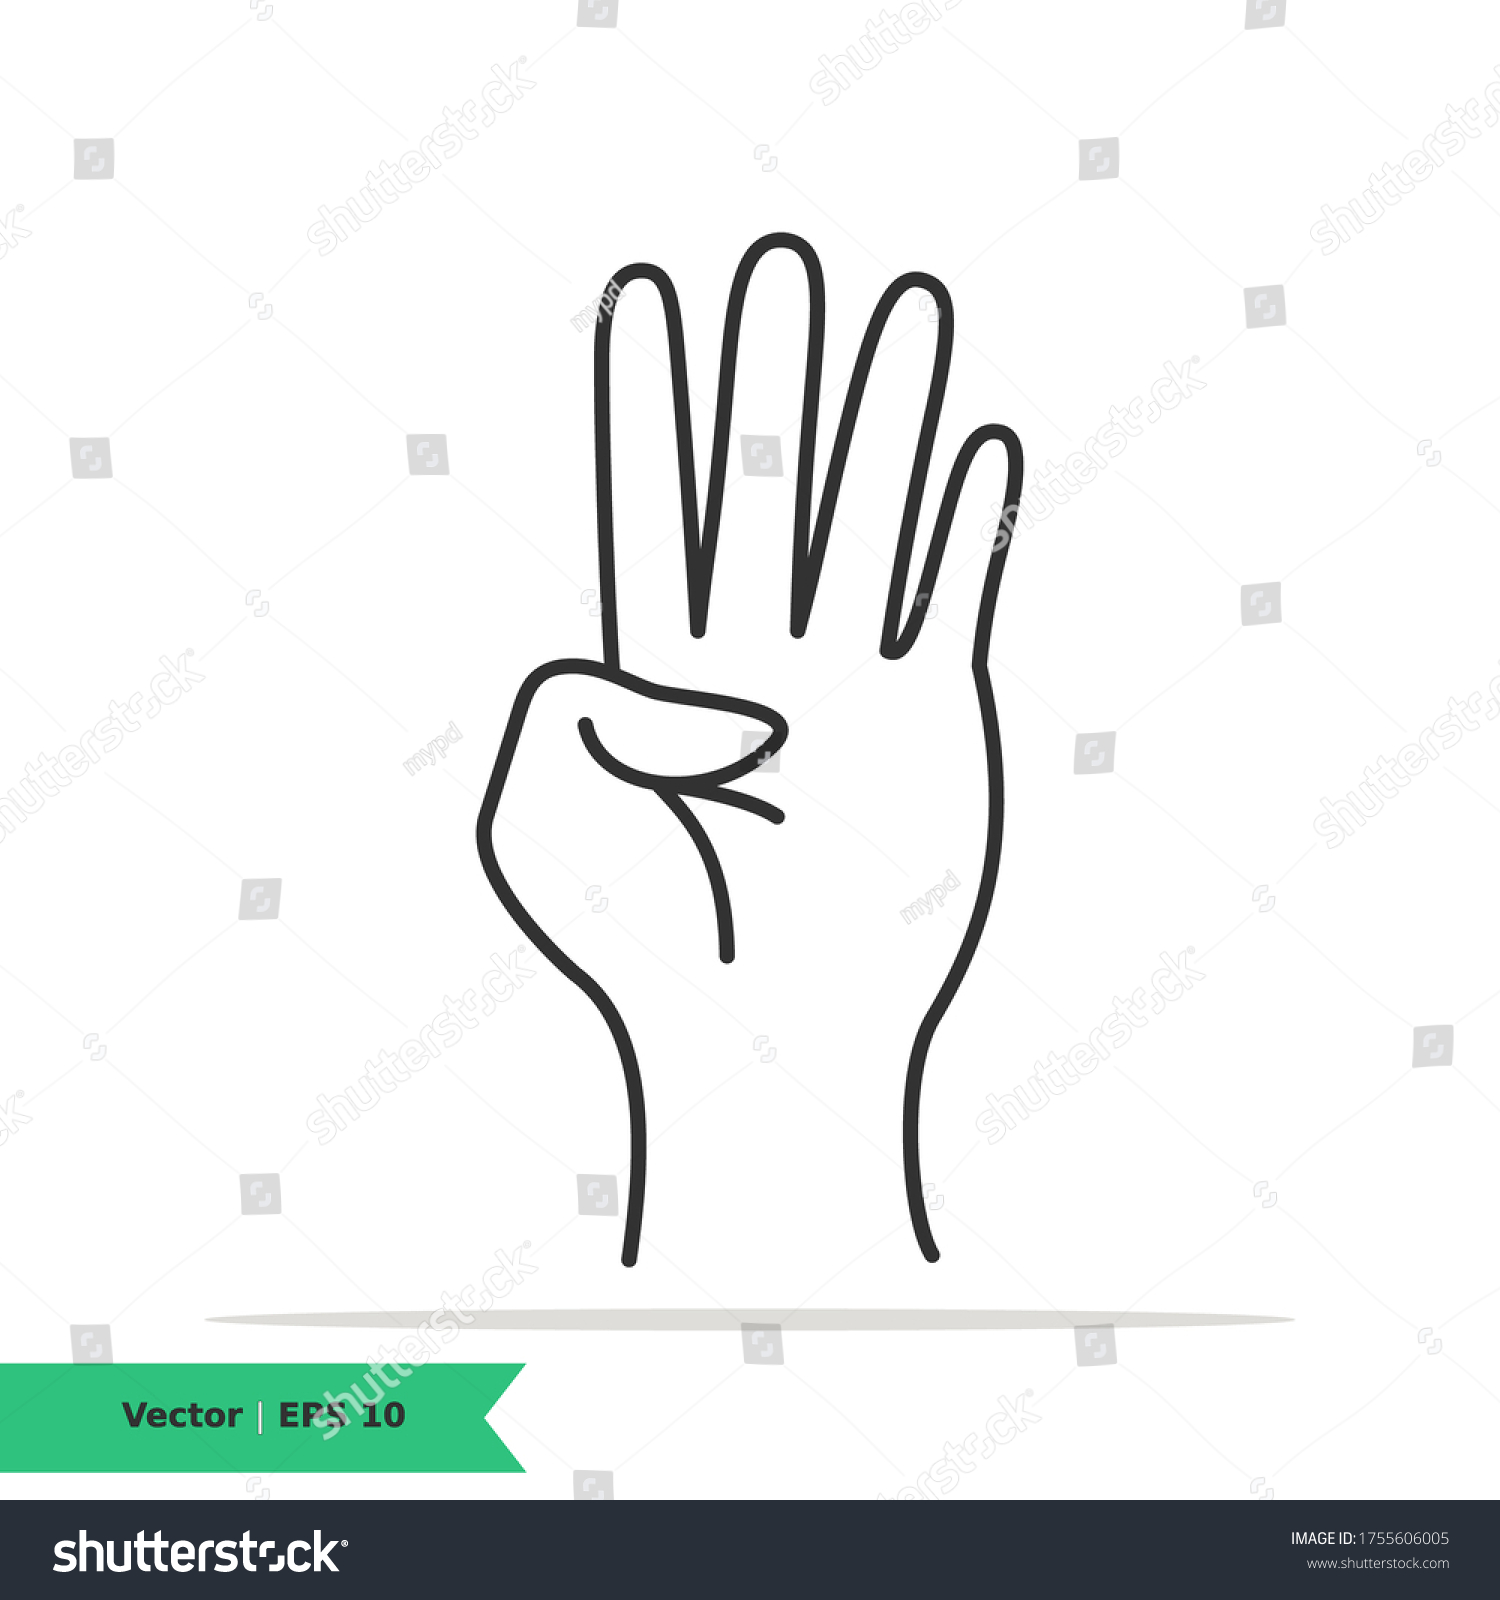 SVG of Gesture Hand Icon Illustration. Number Four Sign Symbol. Vector Line Icon EPS 10 svg